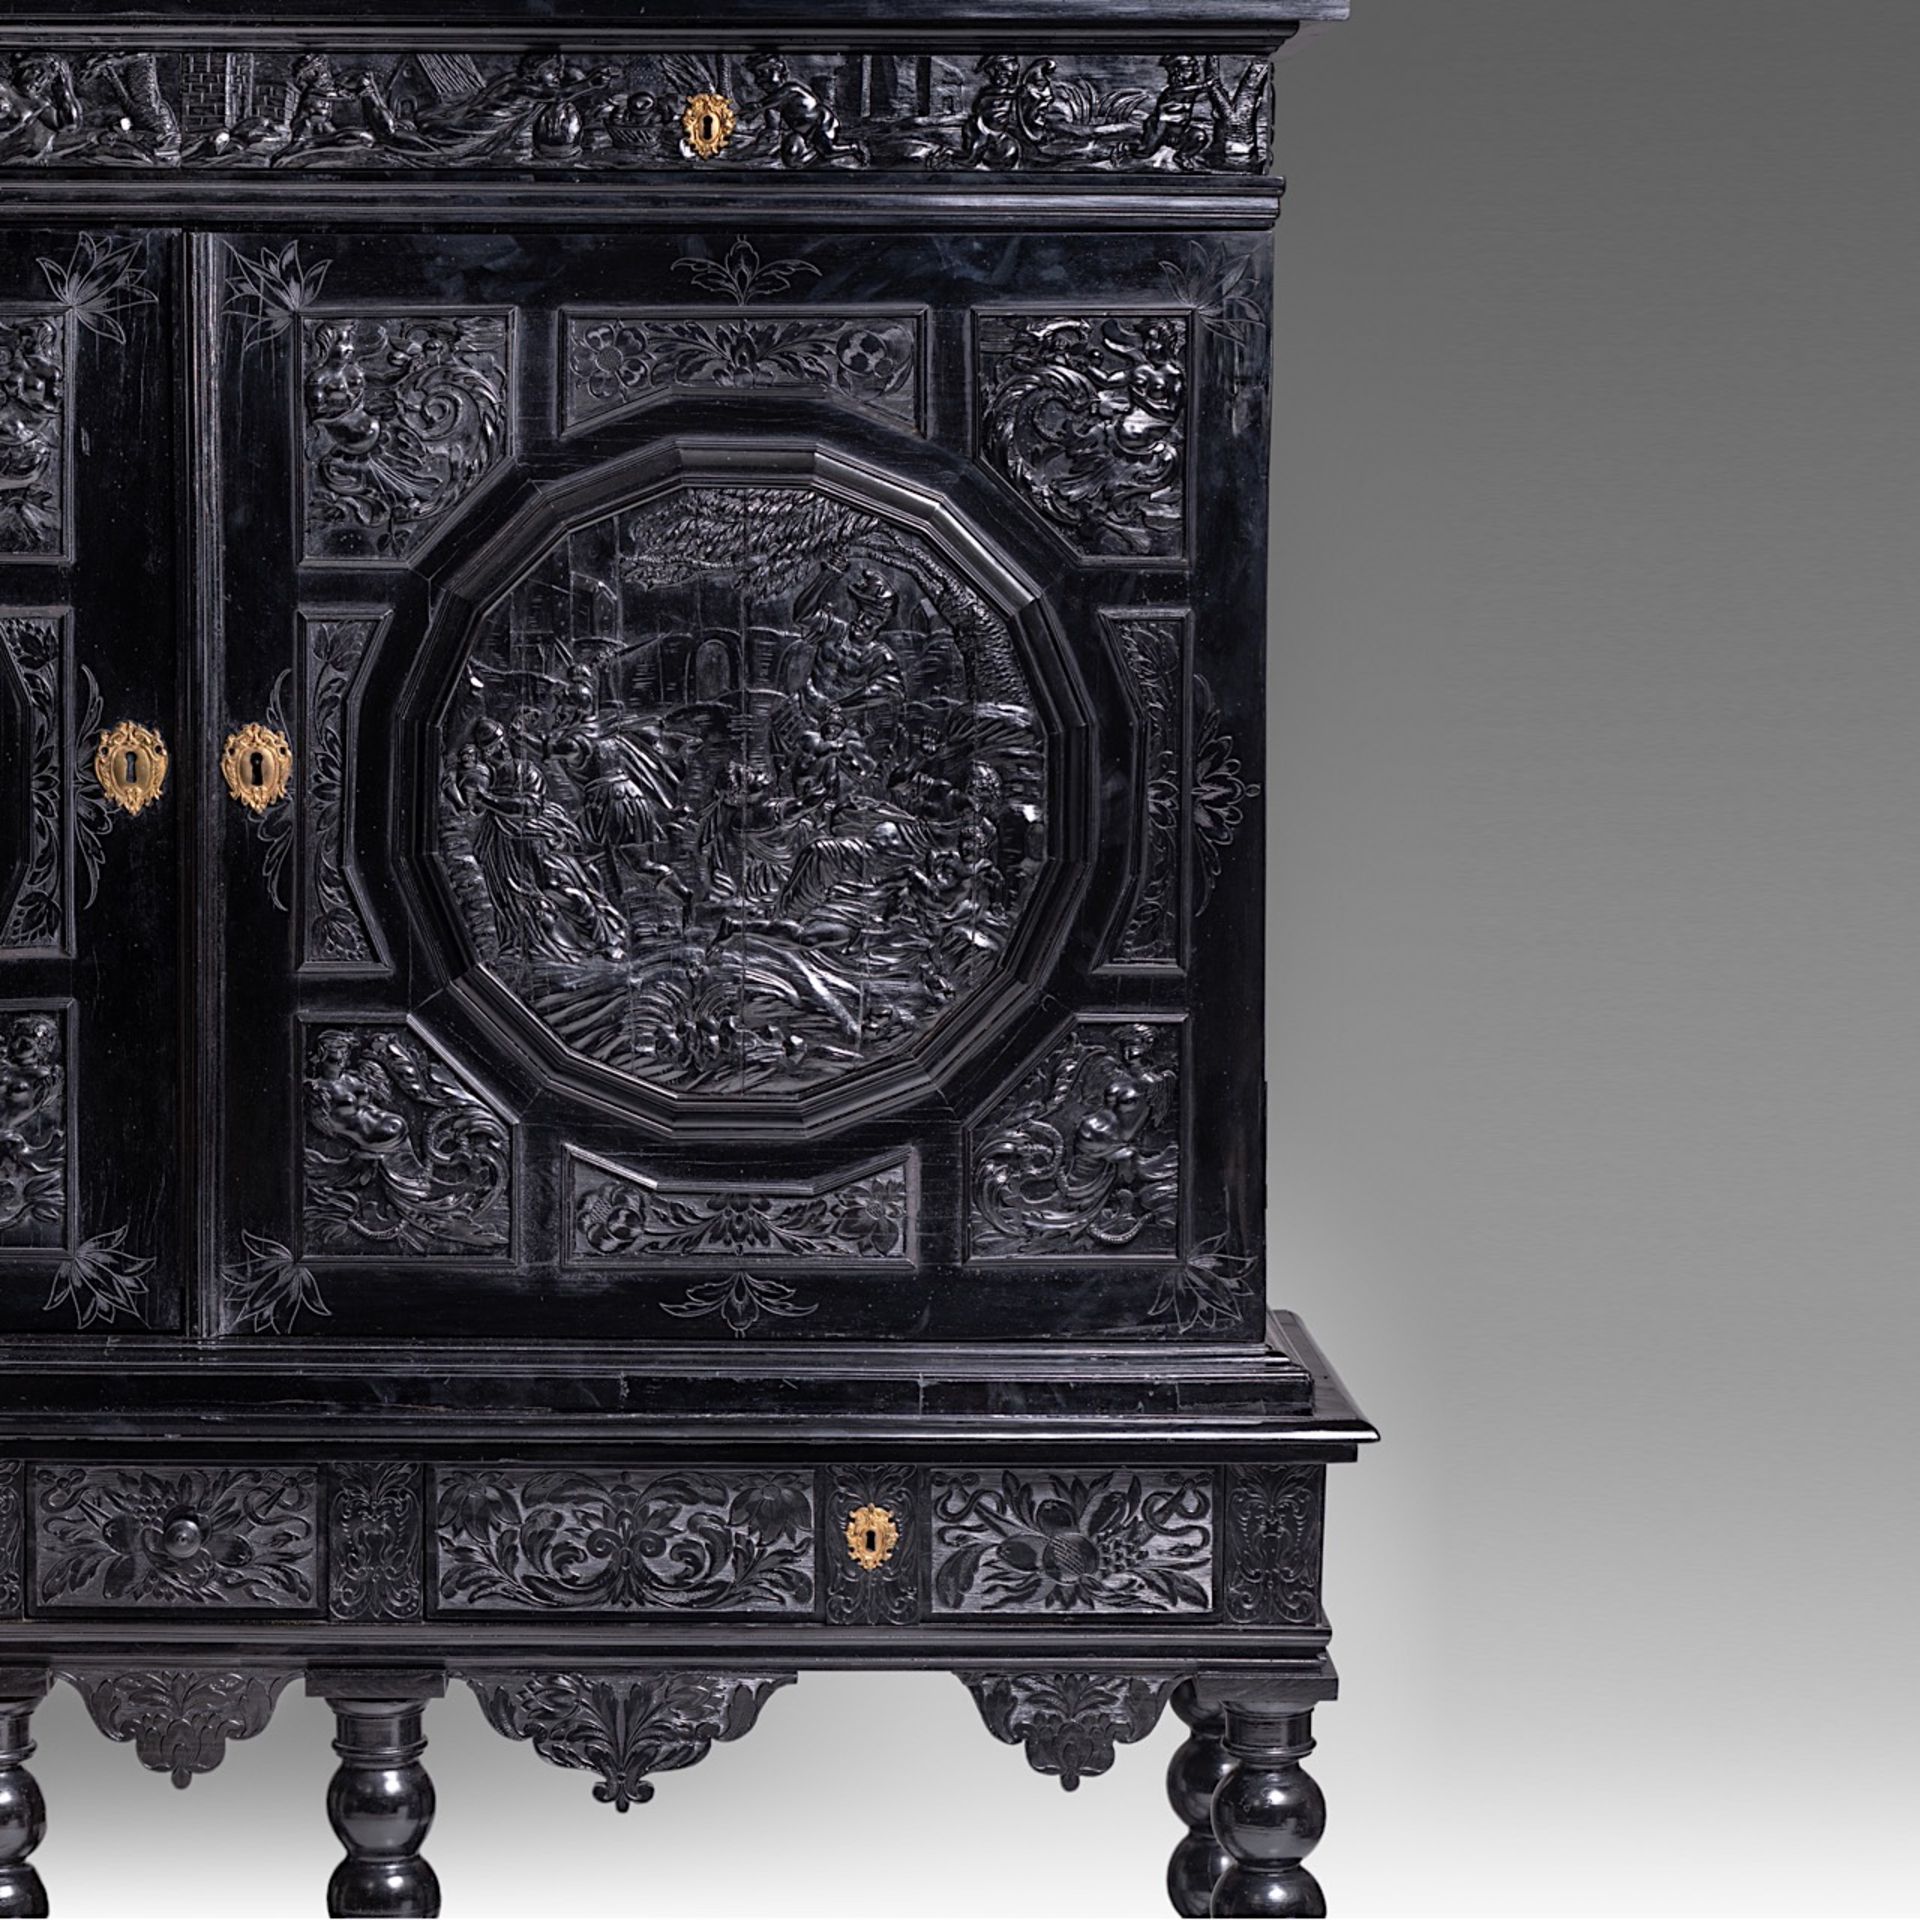 PREMIUM LOT - An exceptional 17thC French ebony and ebonised cabinet-on-stand, H 181,5 - W 163 - D 5 - Bild 11 aus 14